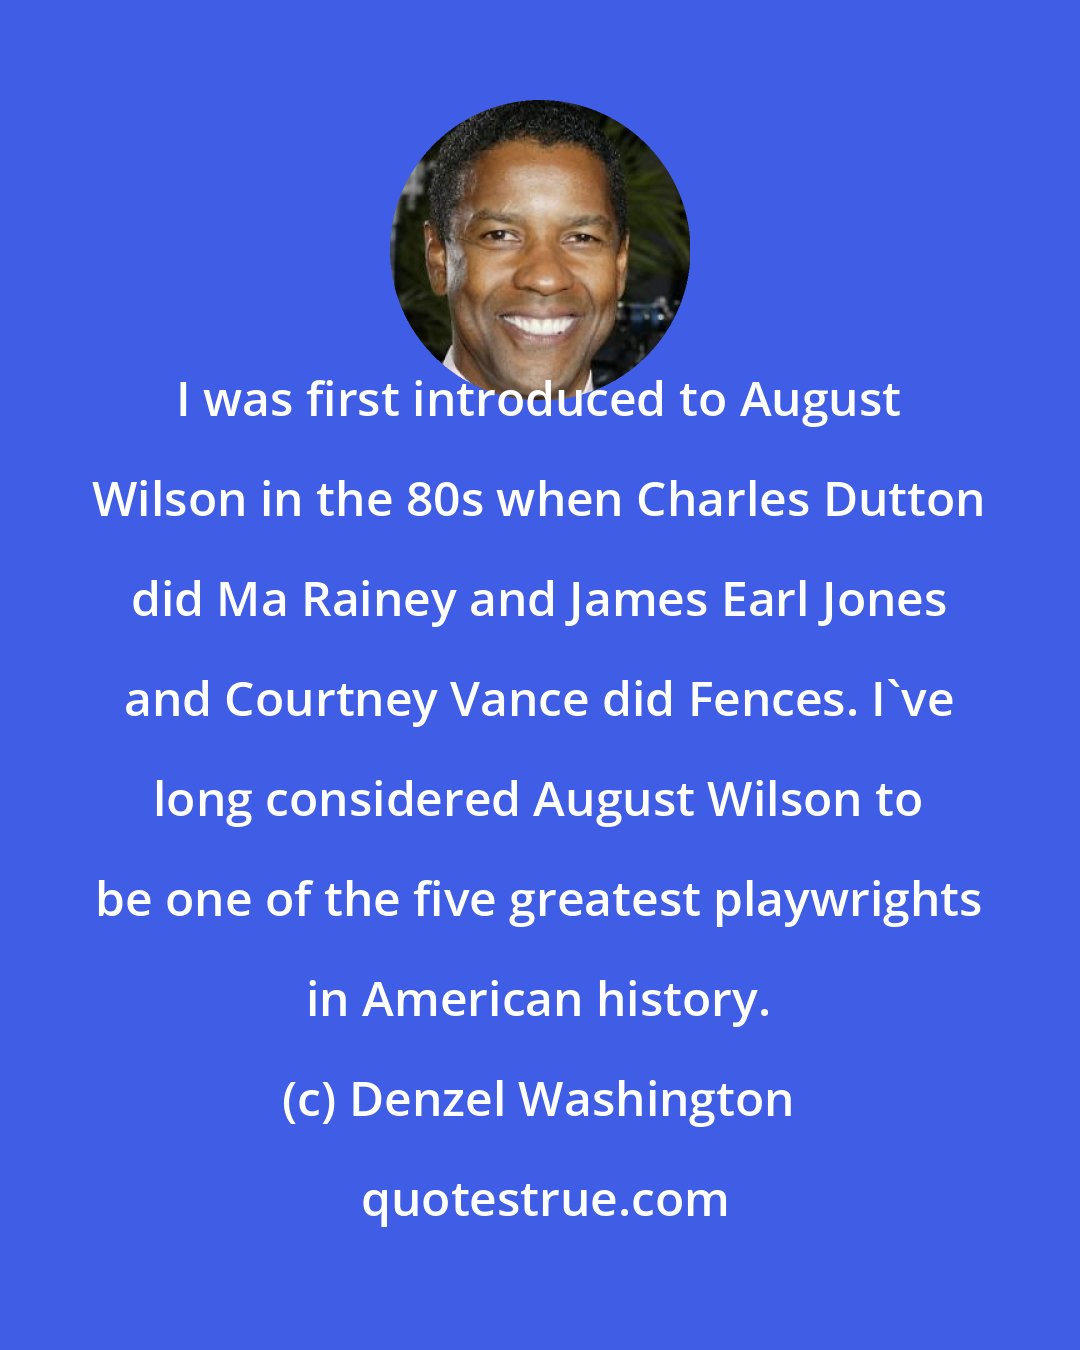 Denzel Washington: I was first introduced to August Wilson in the 80s when Charles Dutton did Ma Rainey and James Earl Jones and Courtney Vance did Fences. I've long considered August Wilson to be one of the five greatest playwrights in American history.